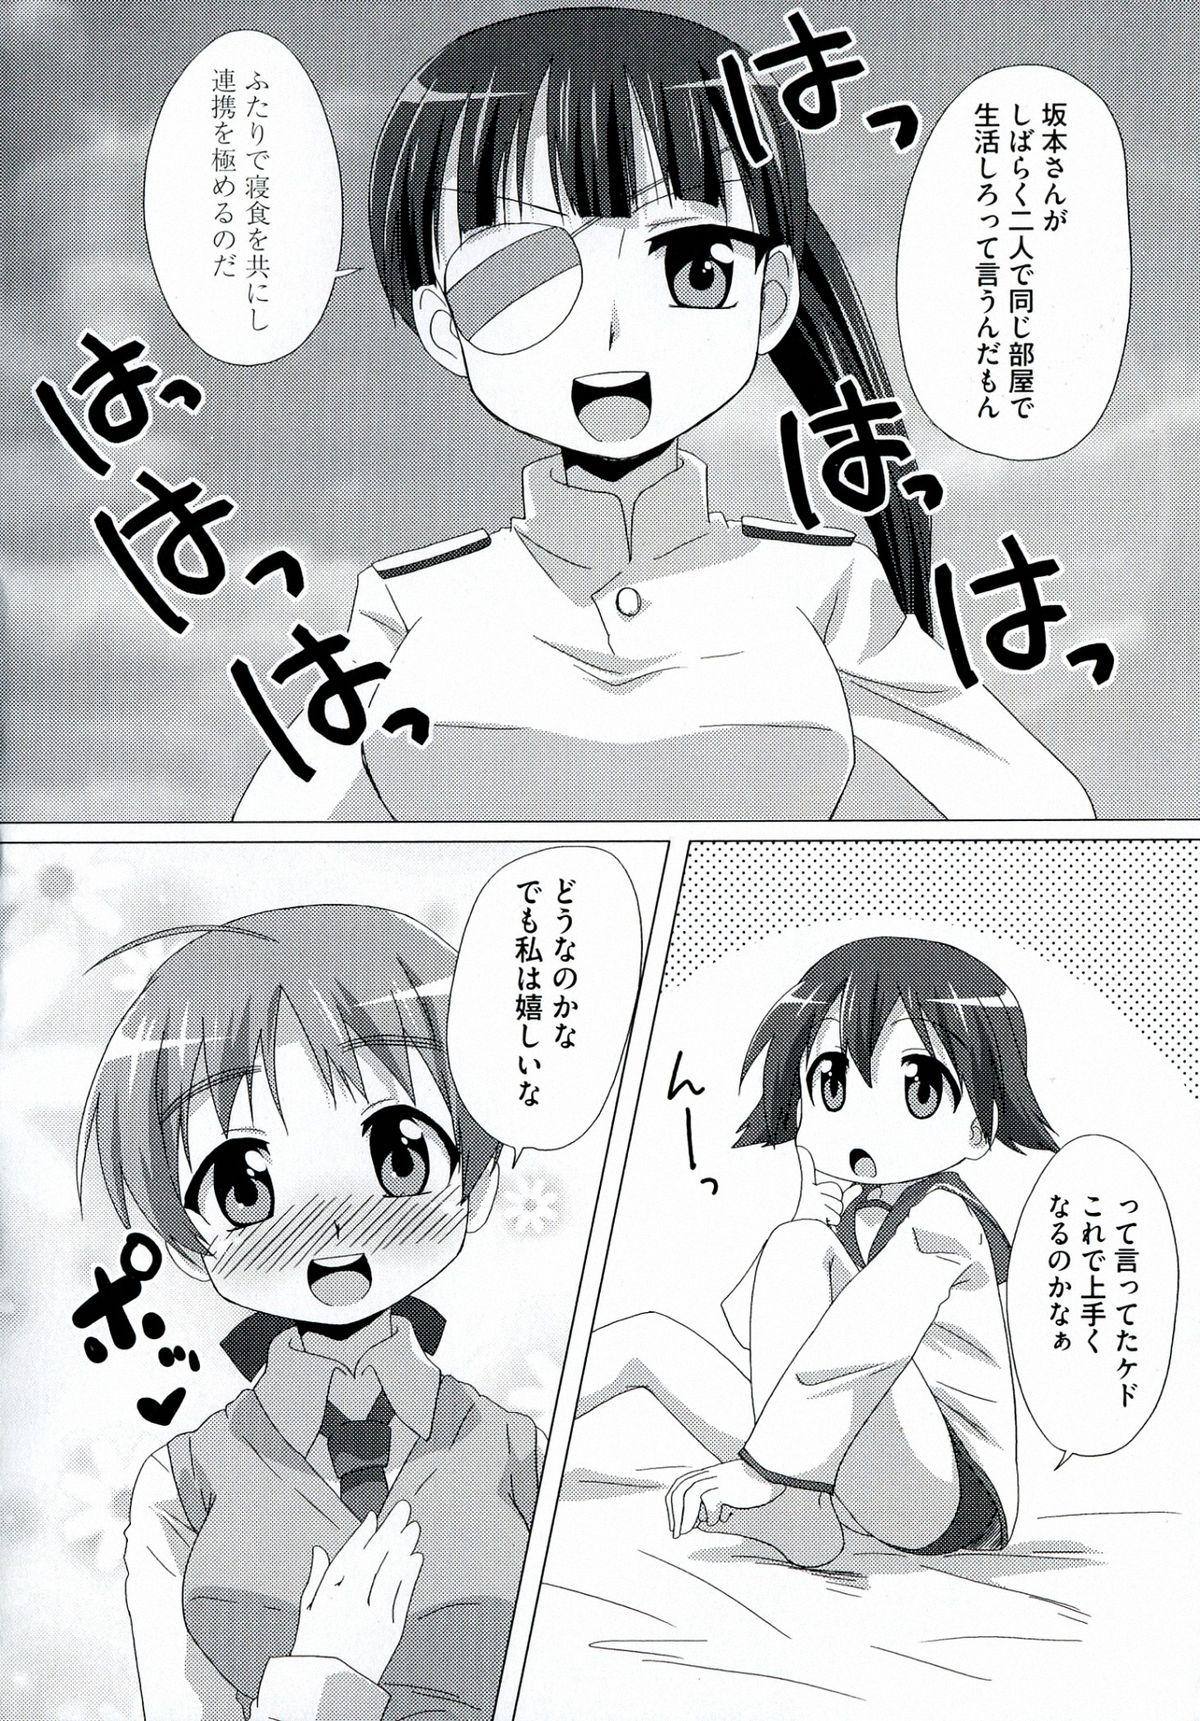 Cock Suck 501 no Witches - Strike witches Dance - Page 6